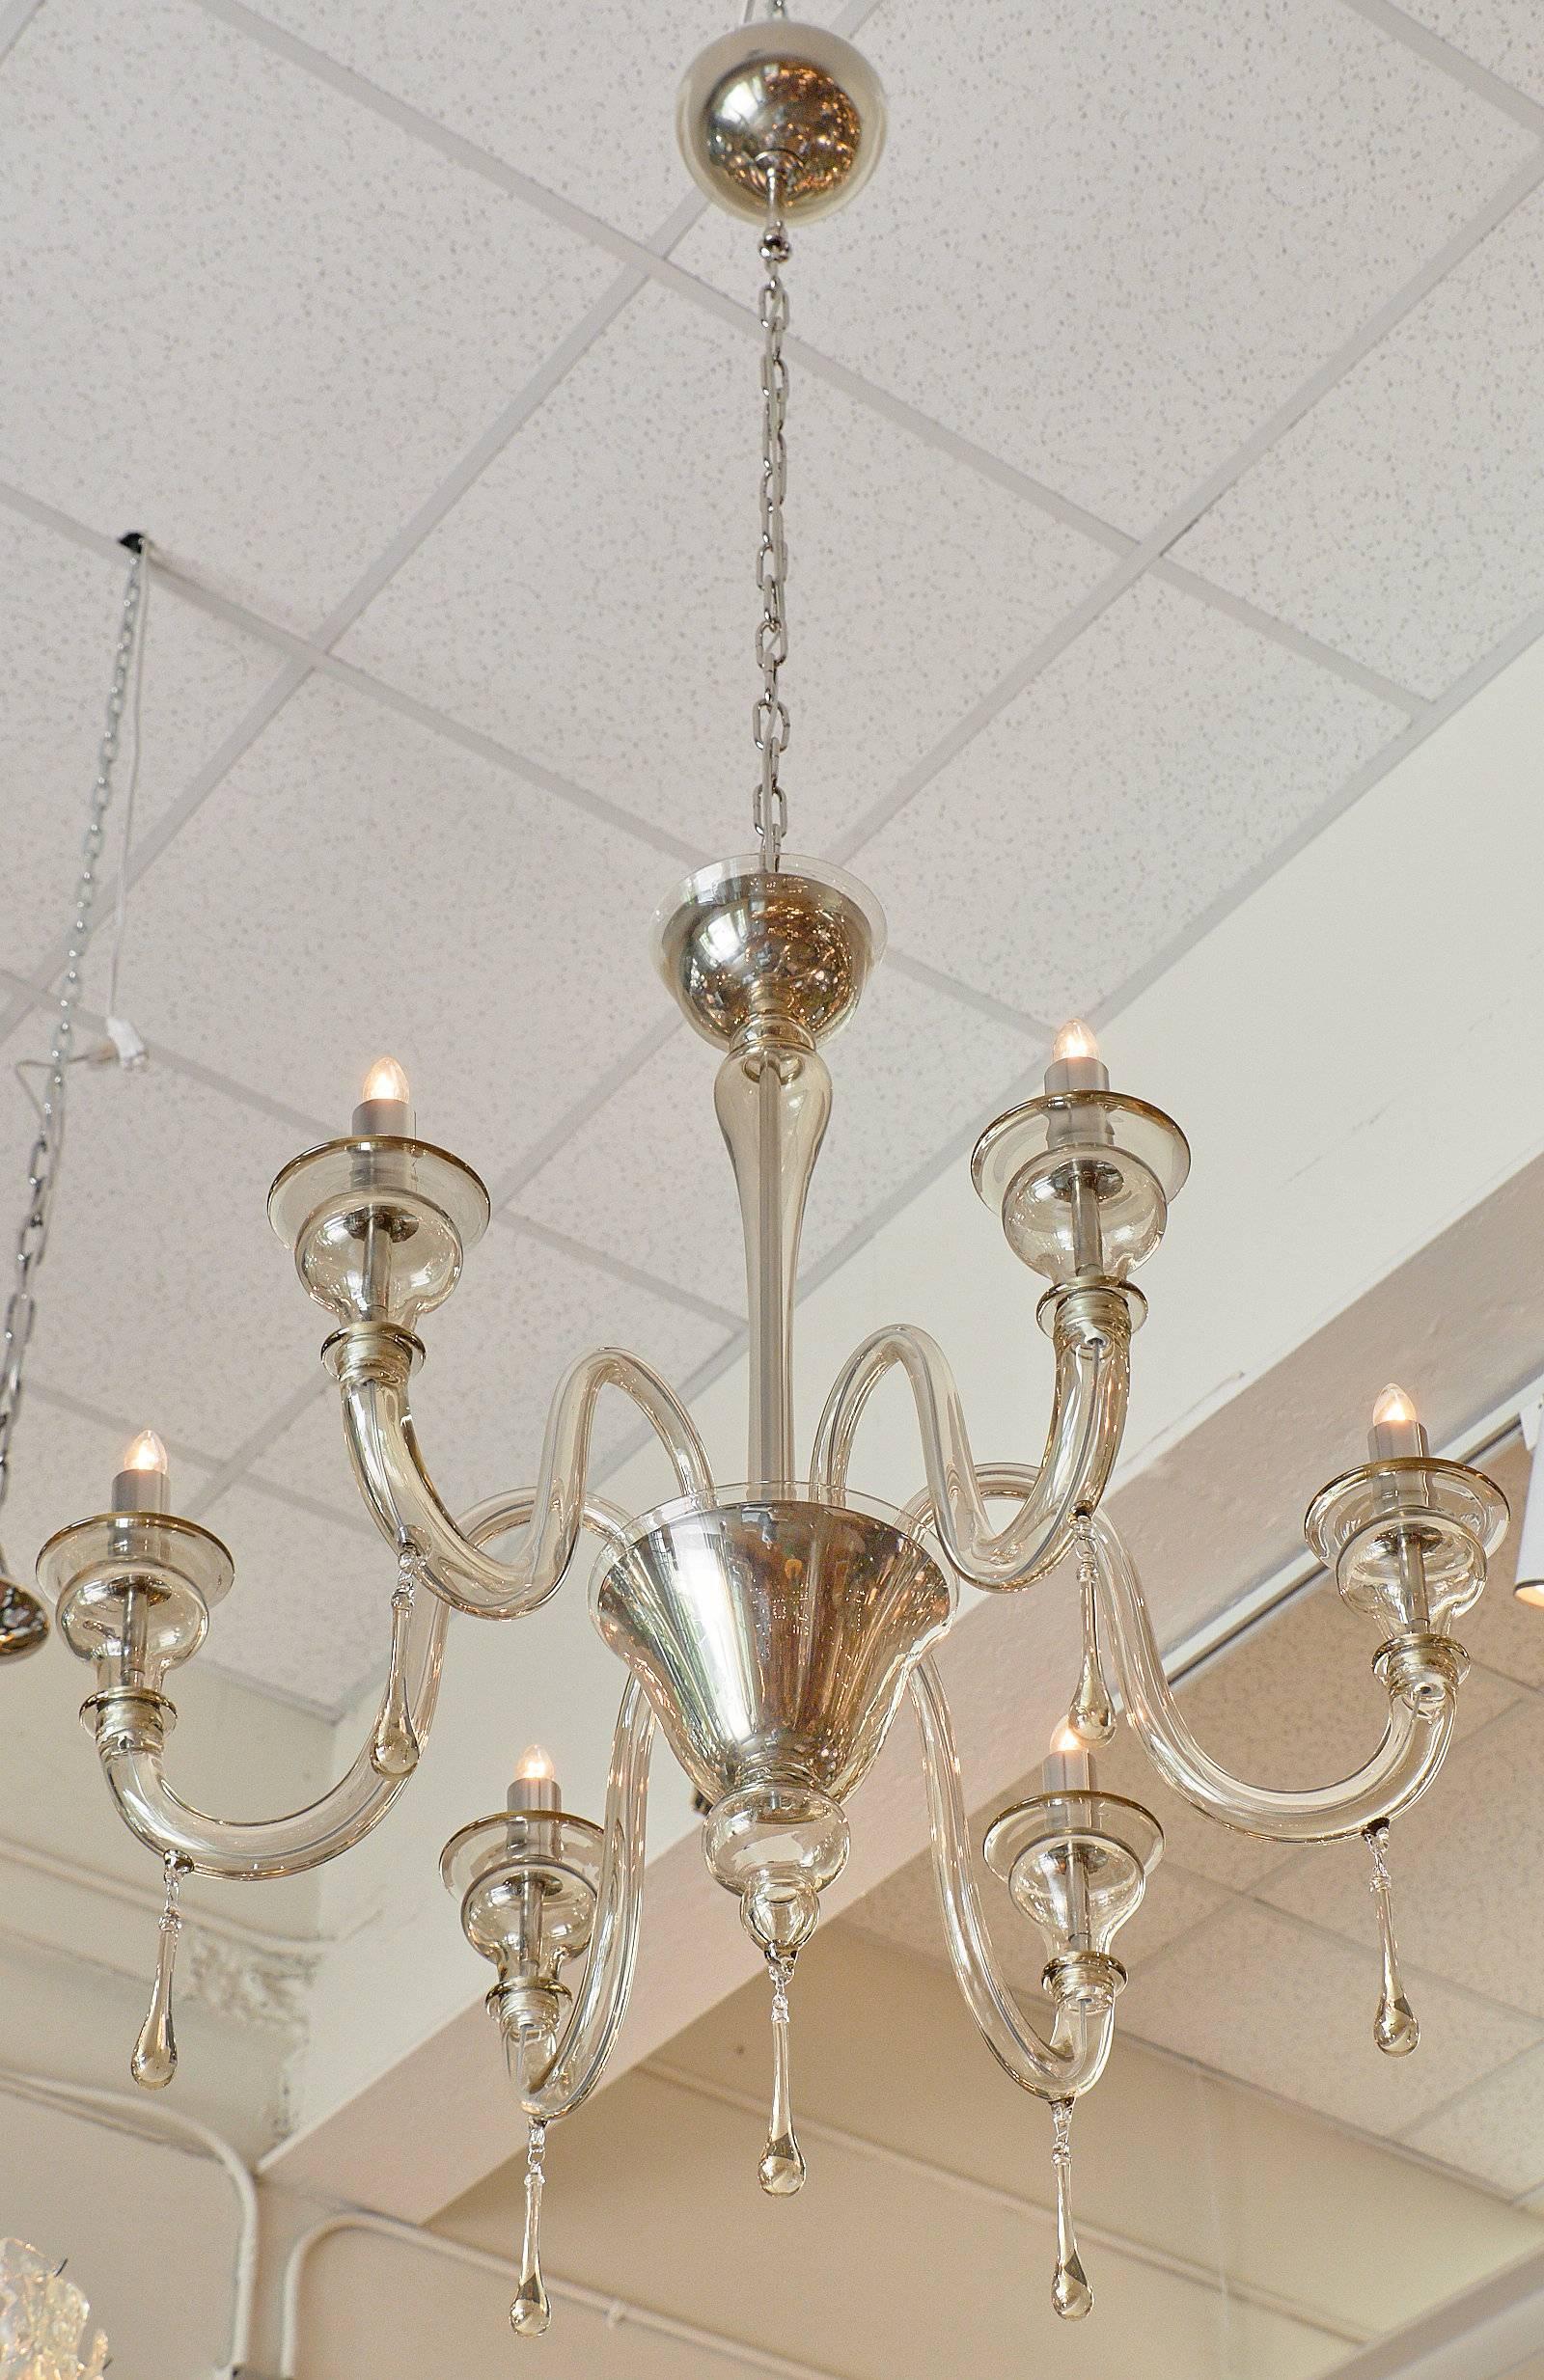 Elegant “Cristallo Antico” chandelier made of handblown Murano glass with a delicate smoked tint. It has six branches with pendants, blown bobêches. The cups and candelabras are chromed, giving this chandelier a more modern look, while the graceful